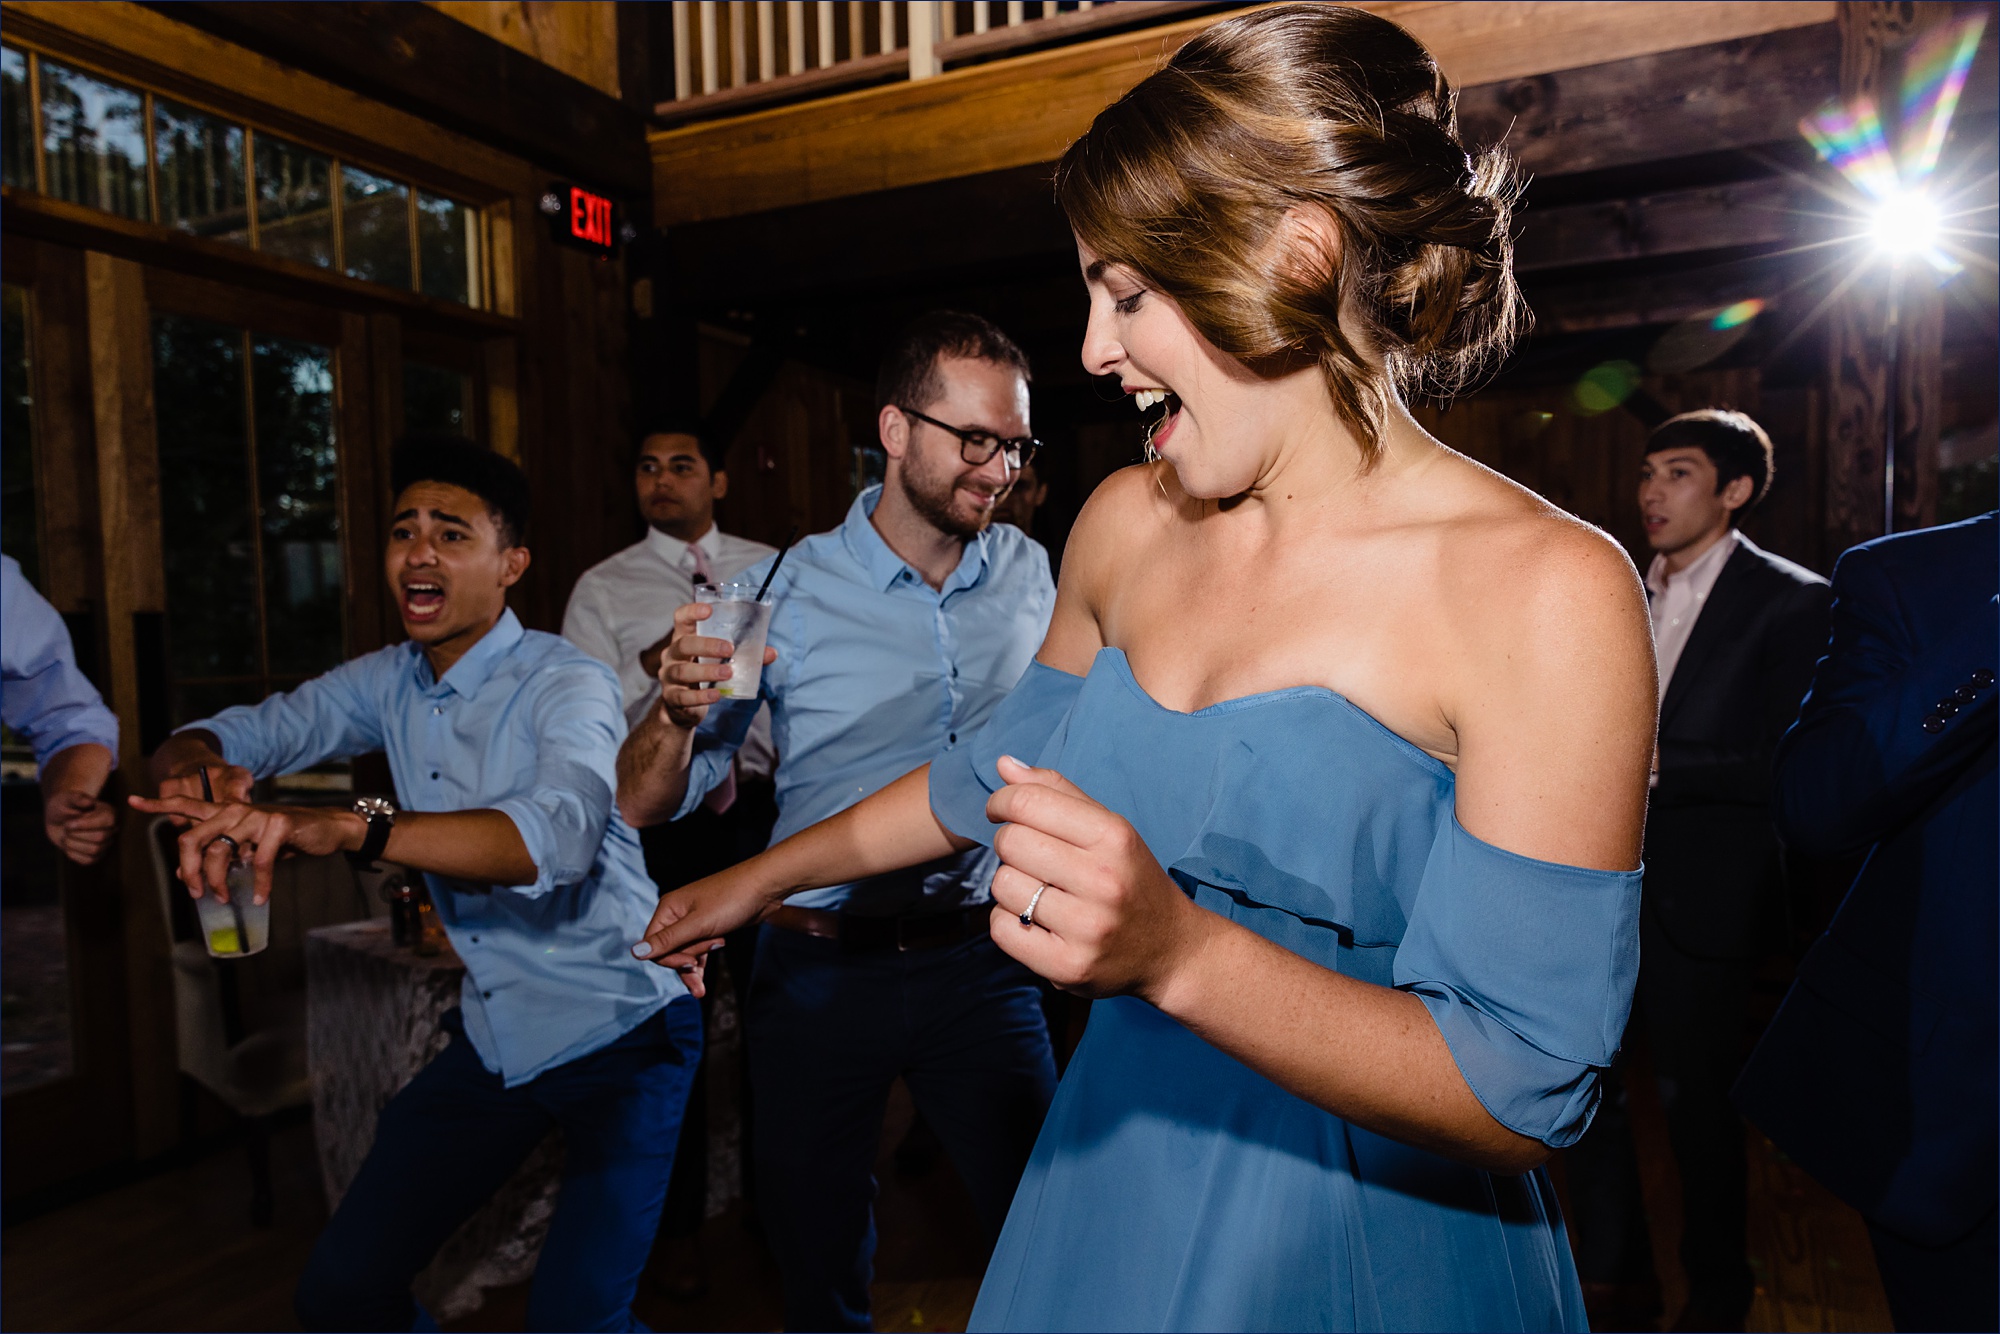 Dancing and singing from the wedding party inside the barn for the NH wedding reception